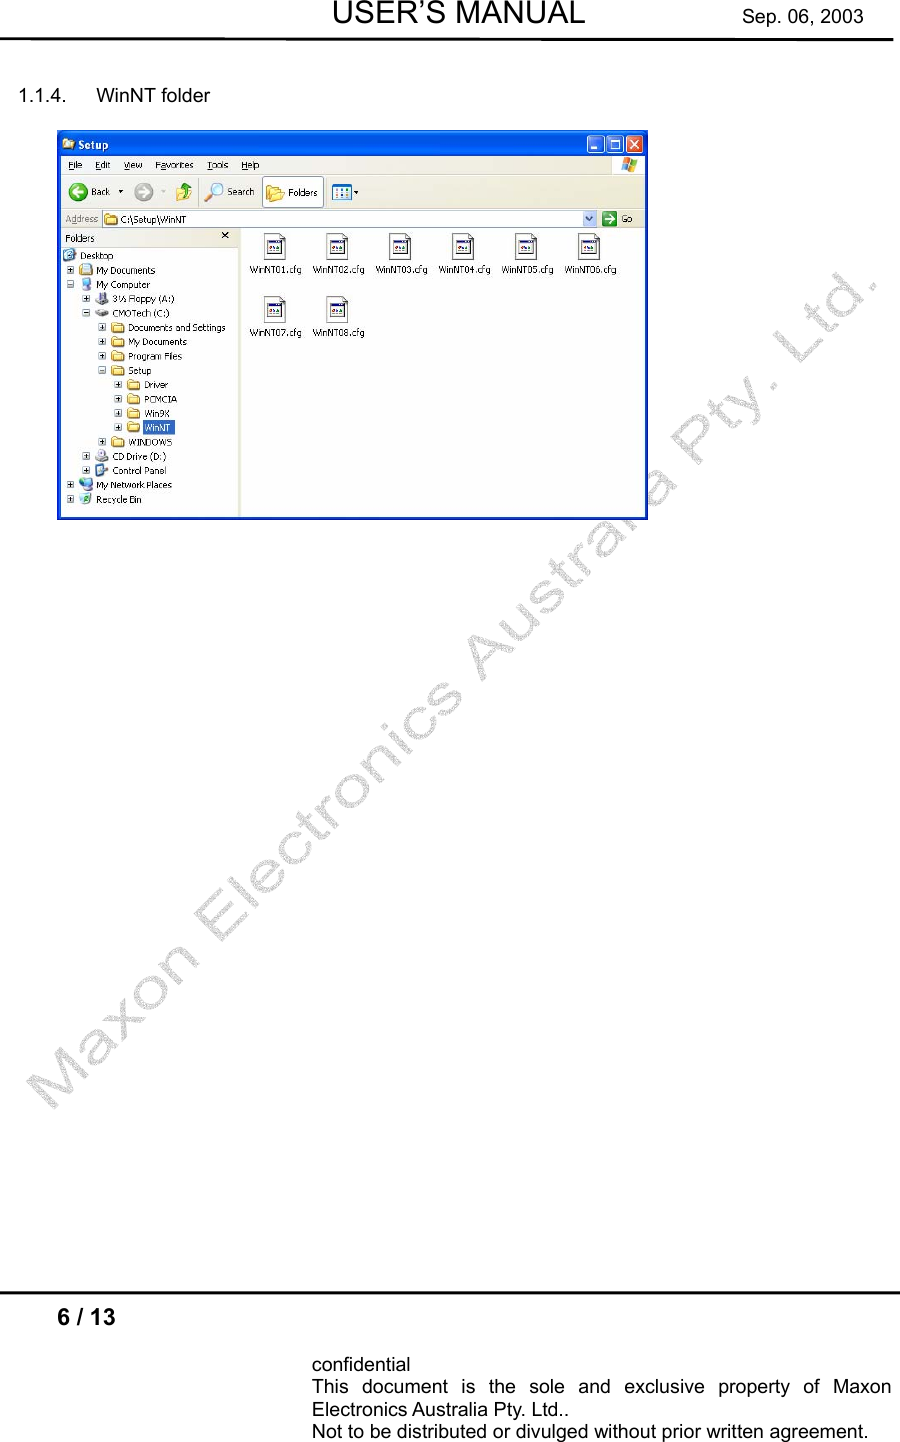        USER’S MANUAL          Sep. 06, 2003  6 / 13  confidential This document is the sole and exclusive property of Maxon Electronics Australia Pty. Ltd.. Not to be distributed or divulged without prior written agreement.     1.1.4. WinNT folder    